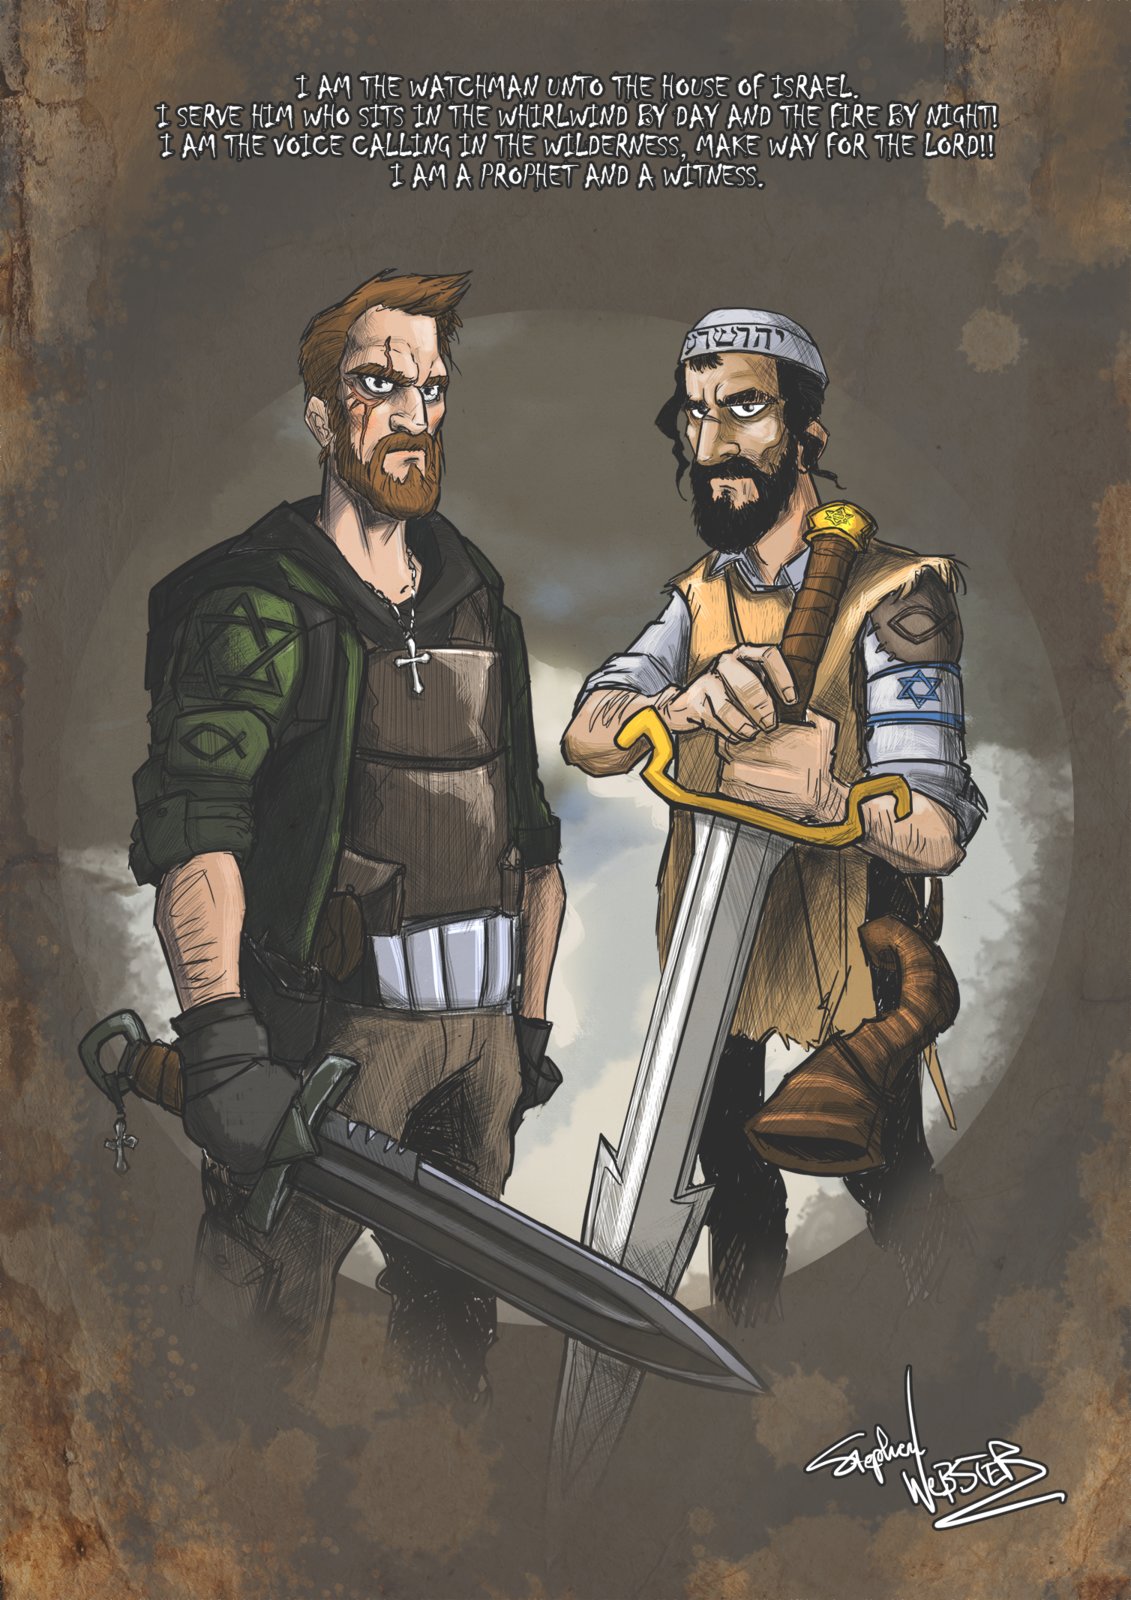 This is a color sketch of Jacob Ransom and Mattathias Kohan, the two main protagonists of Prophets and Locust.